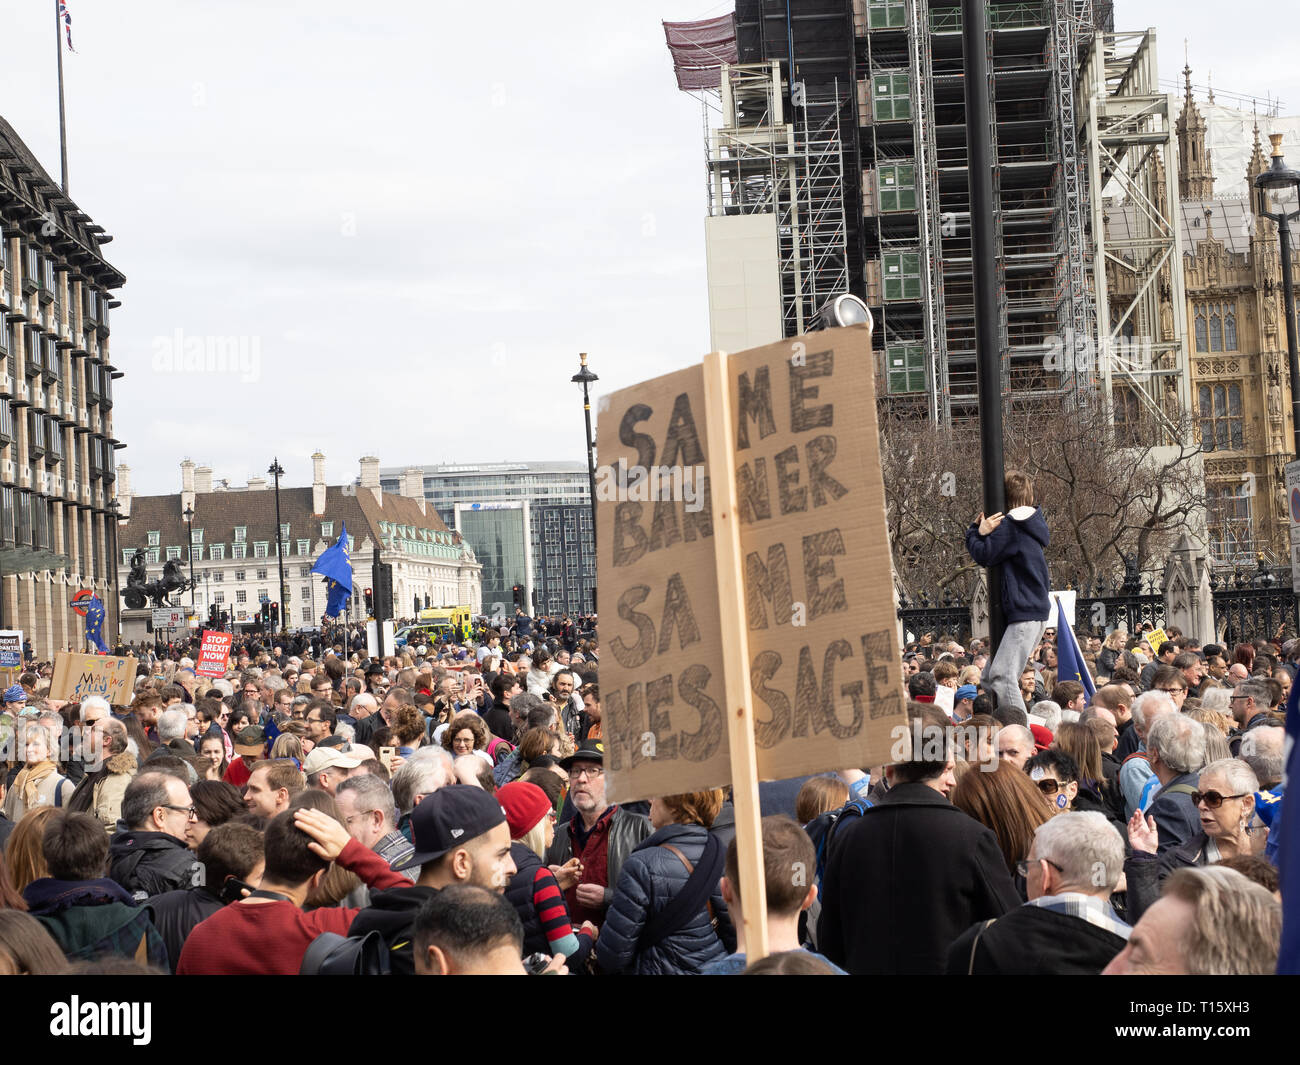 London, UK. 23rd Mar, 2019. Over 1 million people came down to London today to demand another vote on Brexit. Photography by Ghene Snowdon Credit: Ghene Snowdon/Alamy Live News Stock Photo